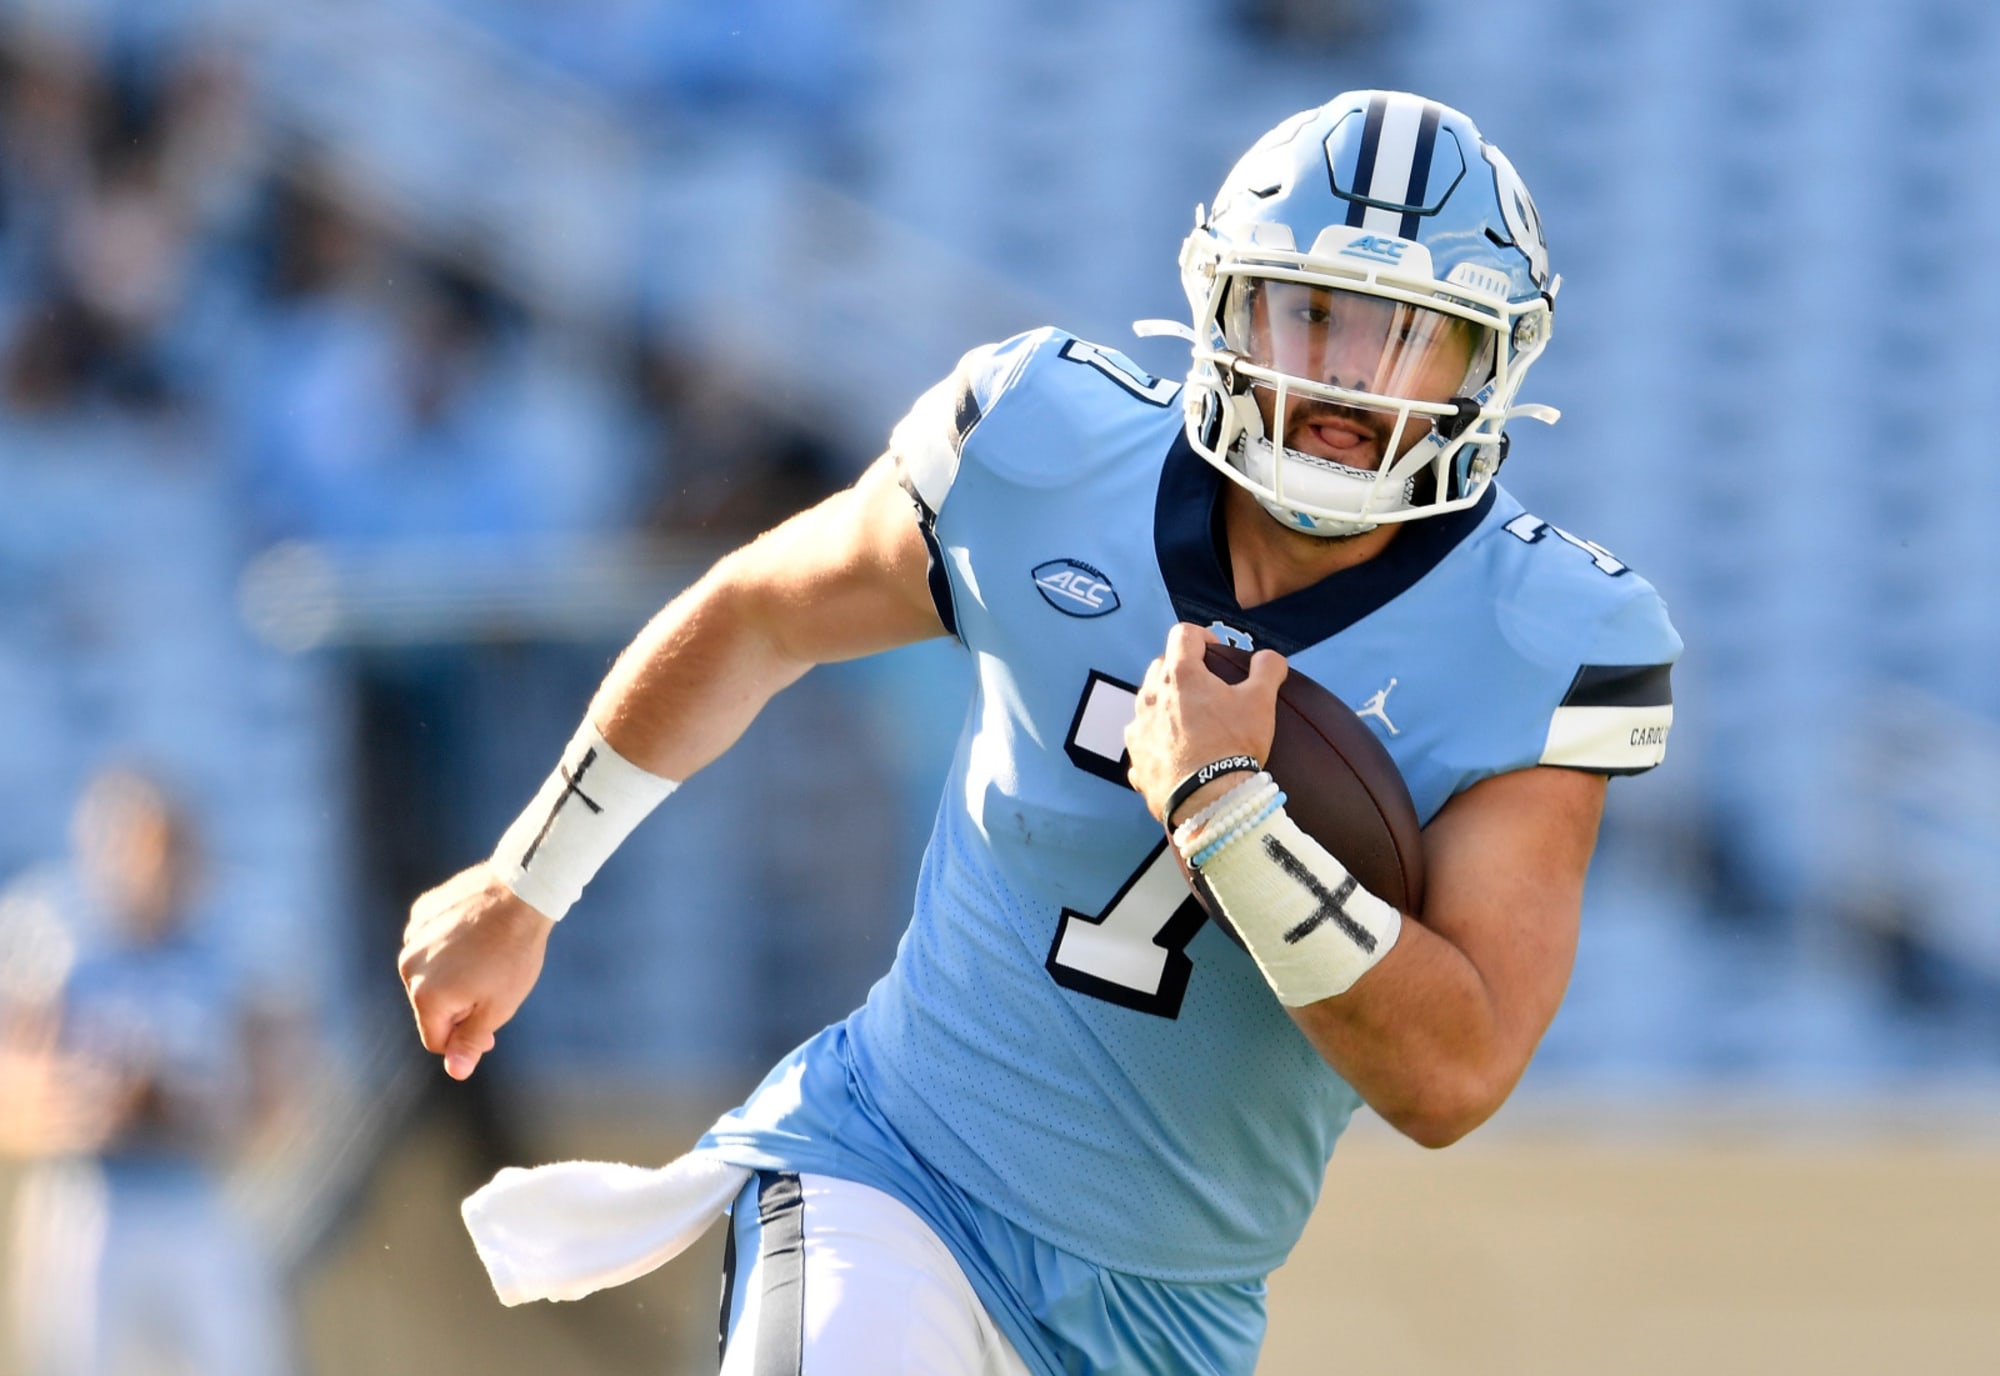 UNC Football Sam Howell as record day in Tar Heels win